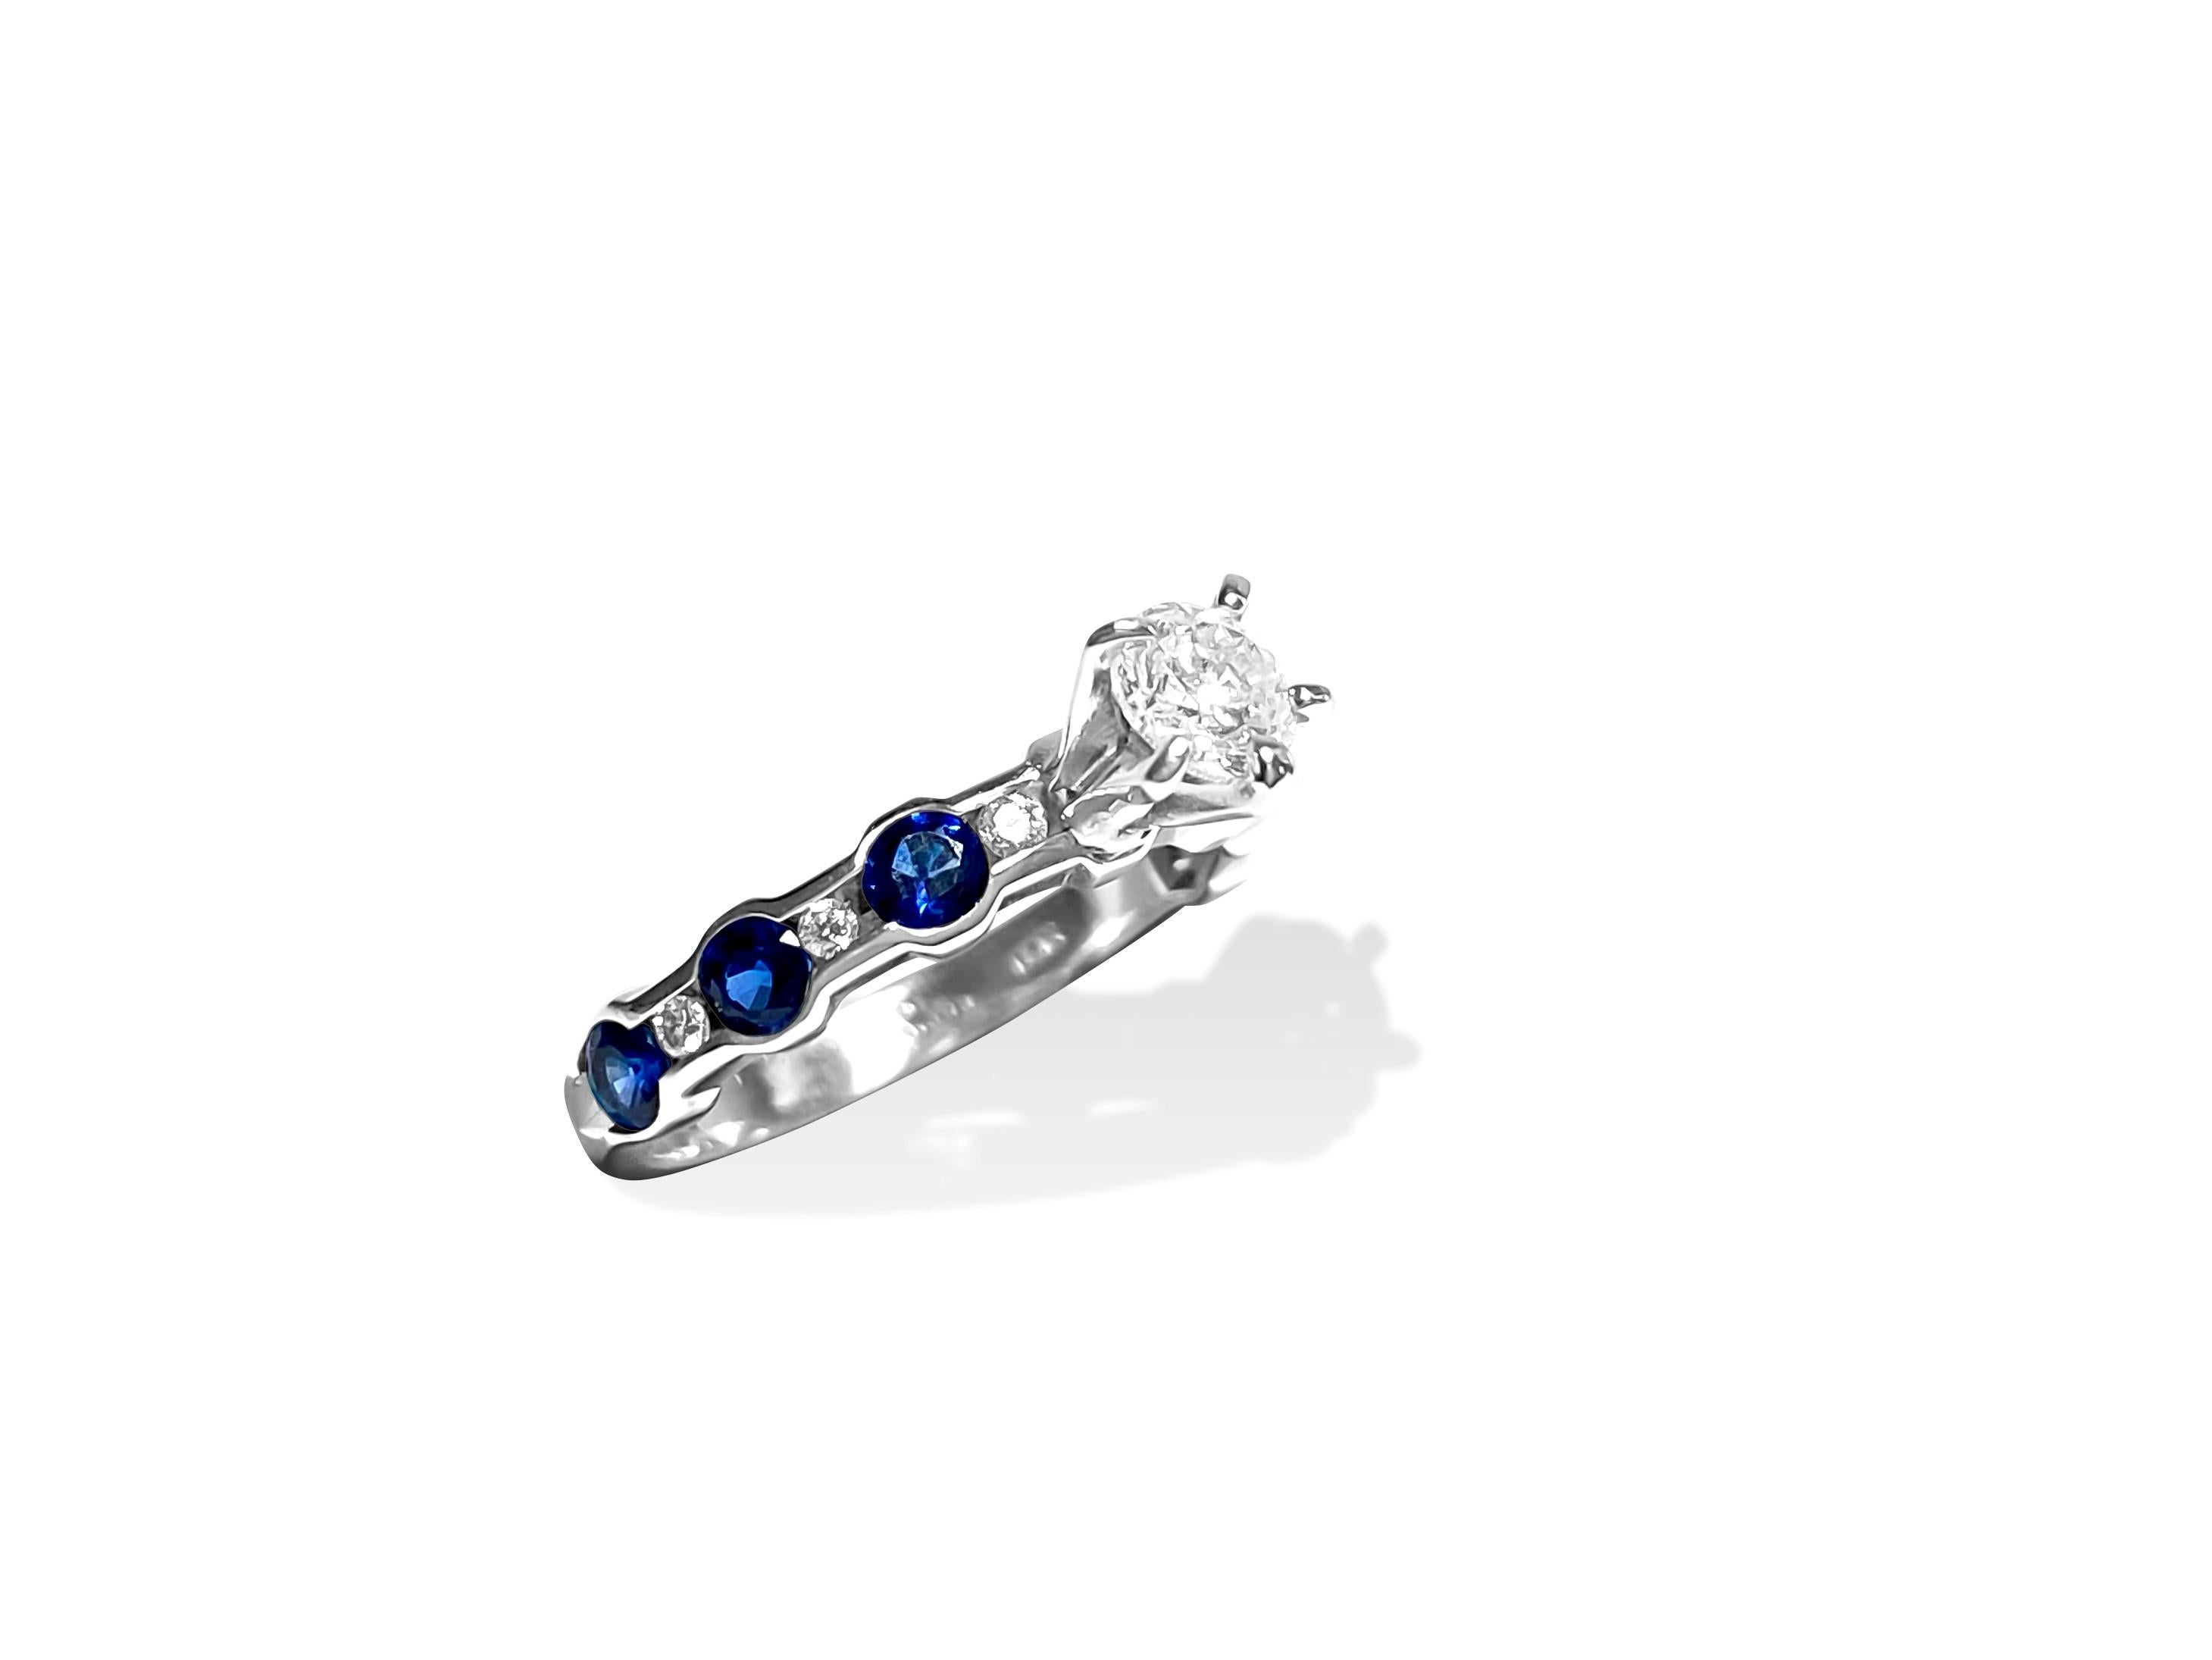 Metal: 14k solid white gold.

 Round cut sapphires, total number of sapphires: 6. Set in prongs. 

Total number of diamonds: 7. F-G color and VS clarity. 

Diamonds shape: round brilliant cut. Channel setting 

All gemstones are 100% natural earth